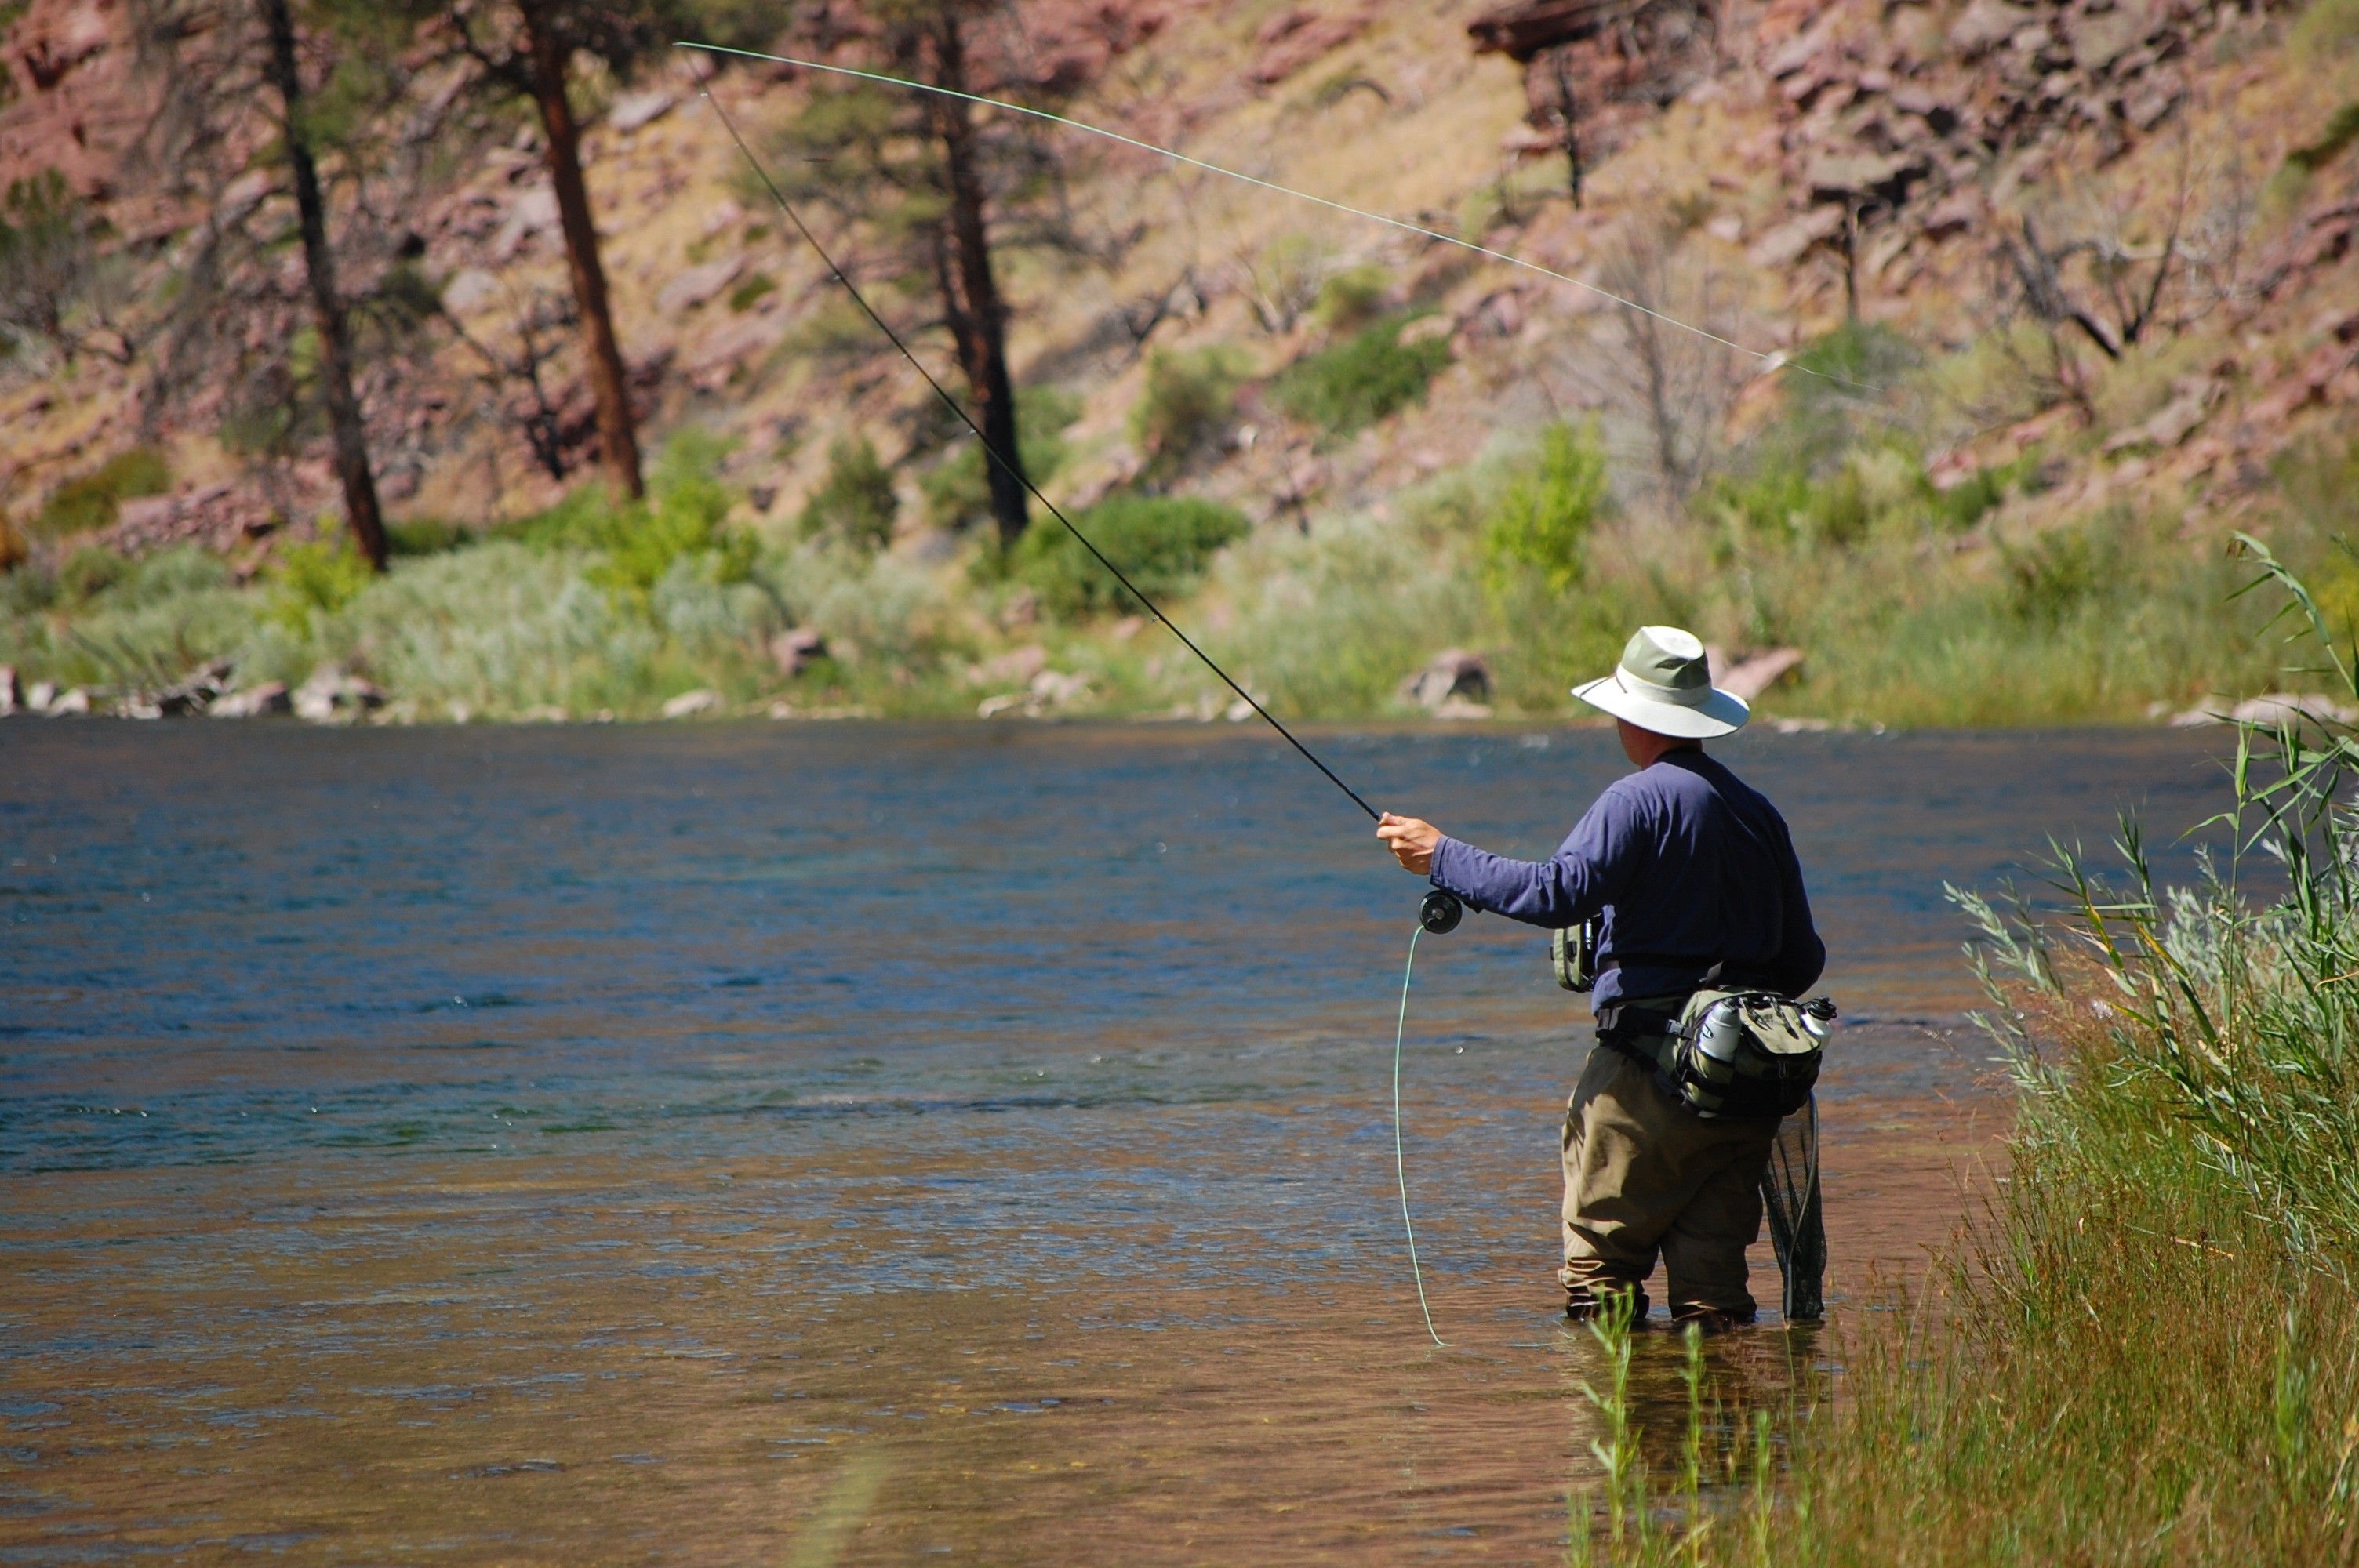 Green River Fly Fishing Guides - Fly Fishing Guides Green River Utah